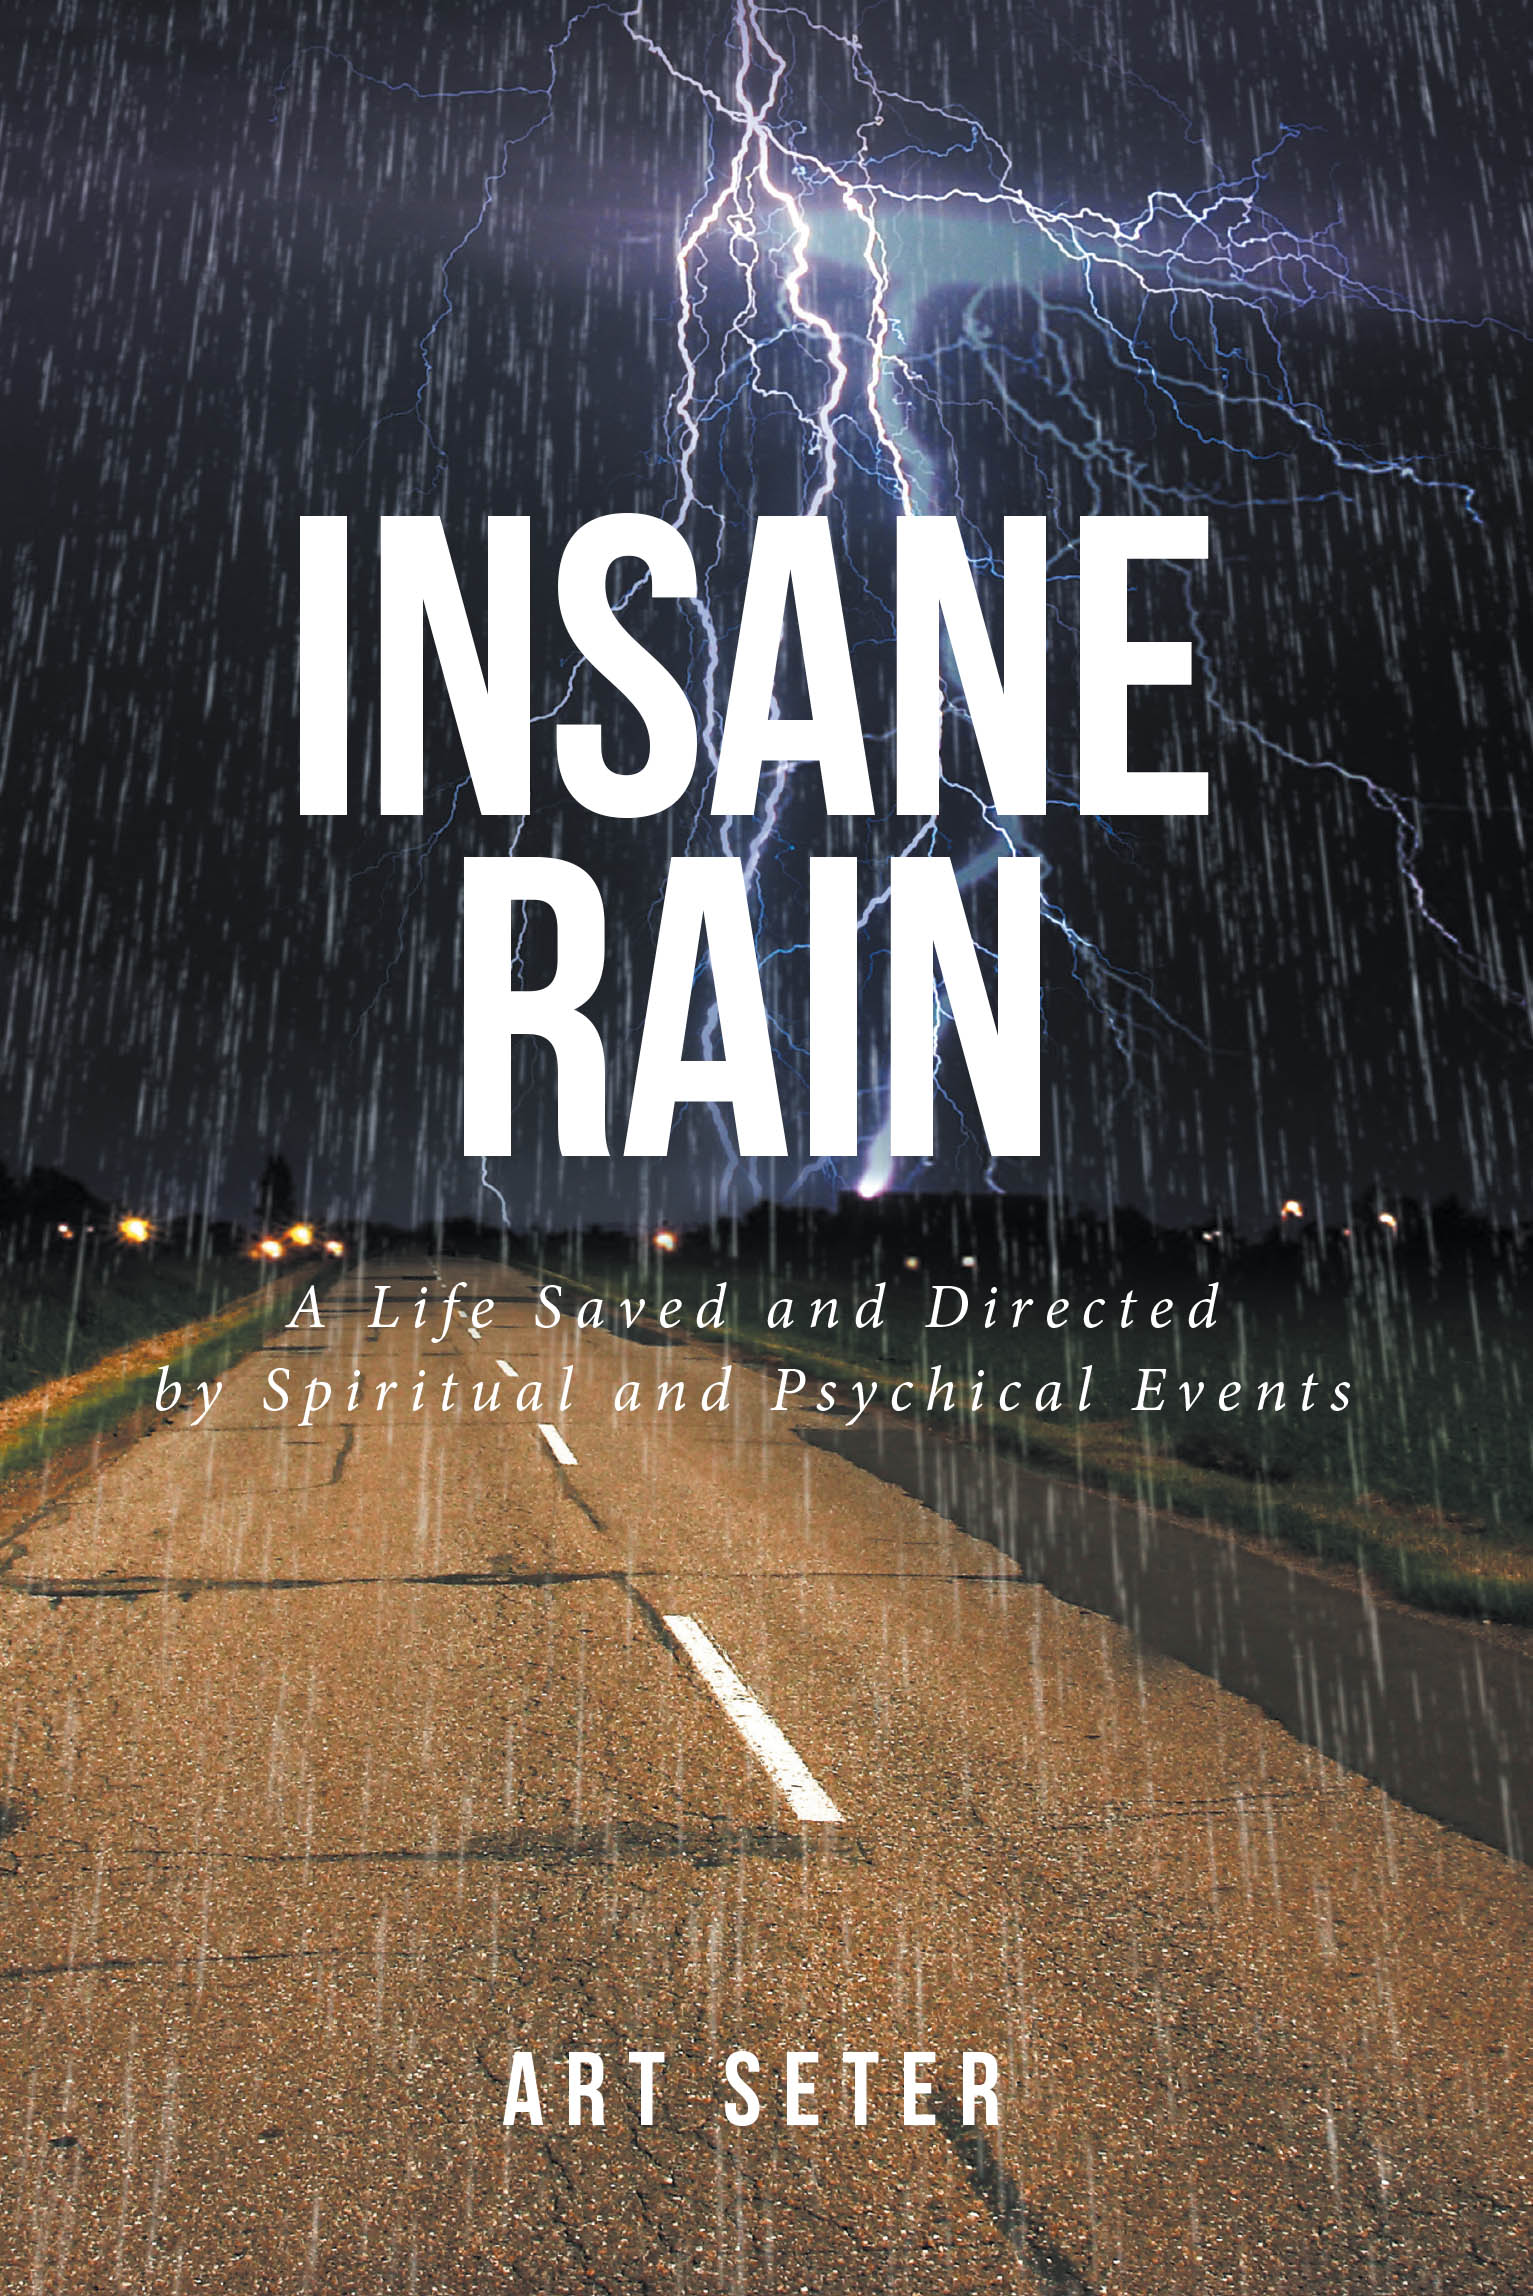 Author Art Seter’s New Book, "Insane Rain: A Life Saved and Directed by Spiritual and Psychical Events," is the Story of Seter’s Life and the Phenomena That Shaped It